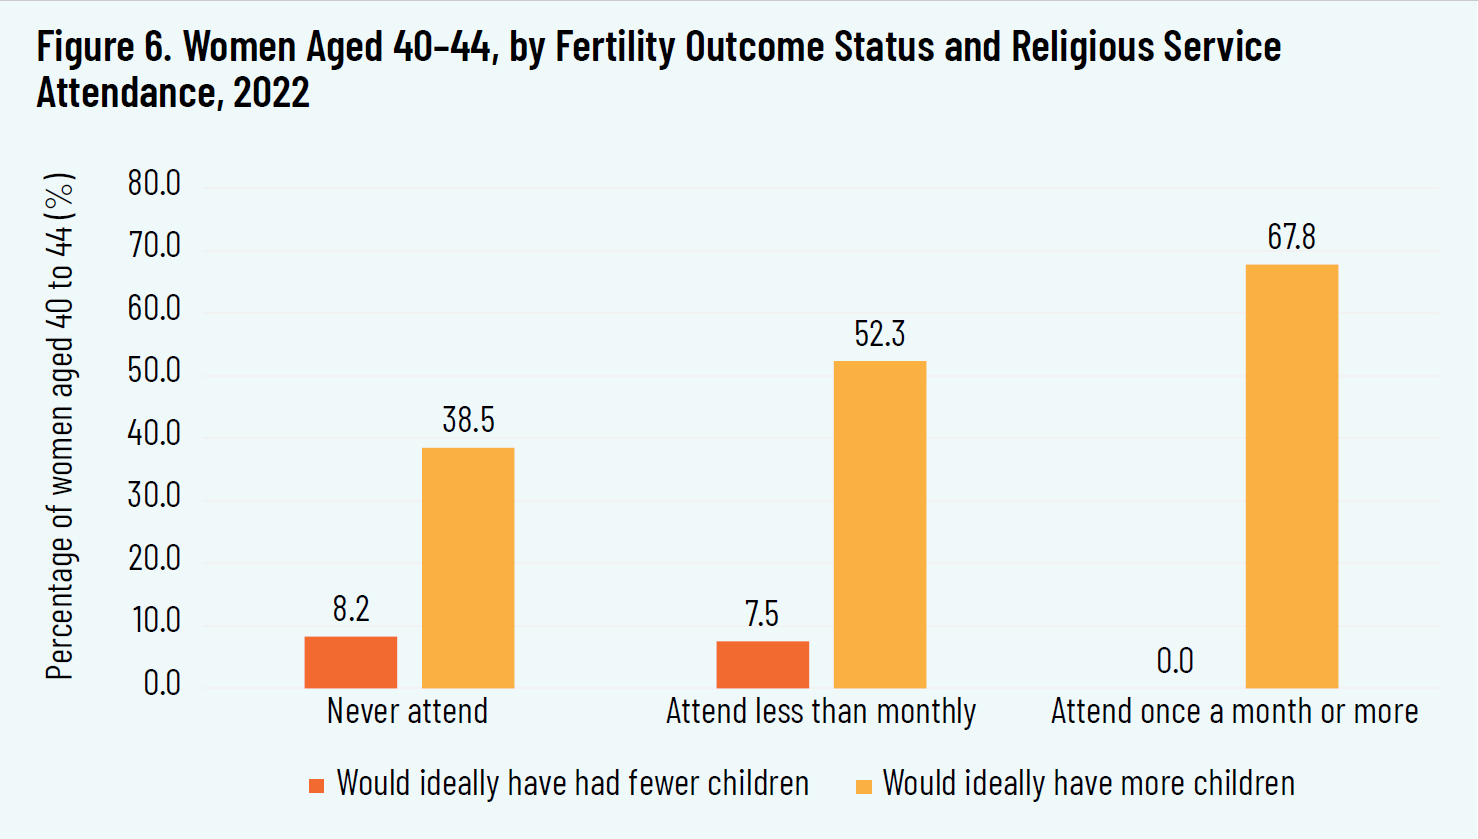 Figure 6. Women Aged 40-44, by Fertility Outcome Status and Religious Service Attendance, 2022